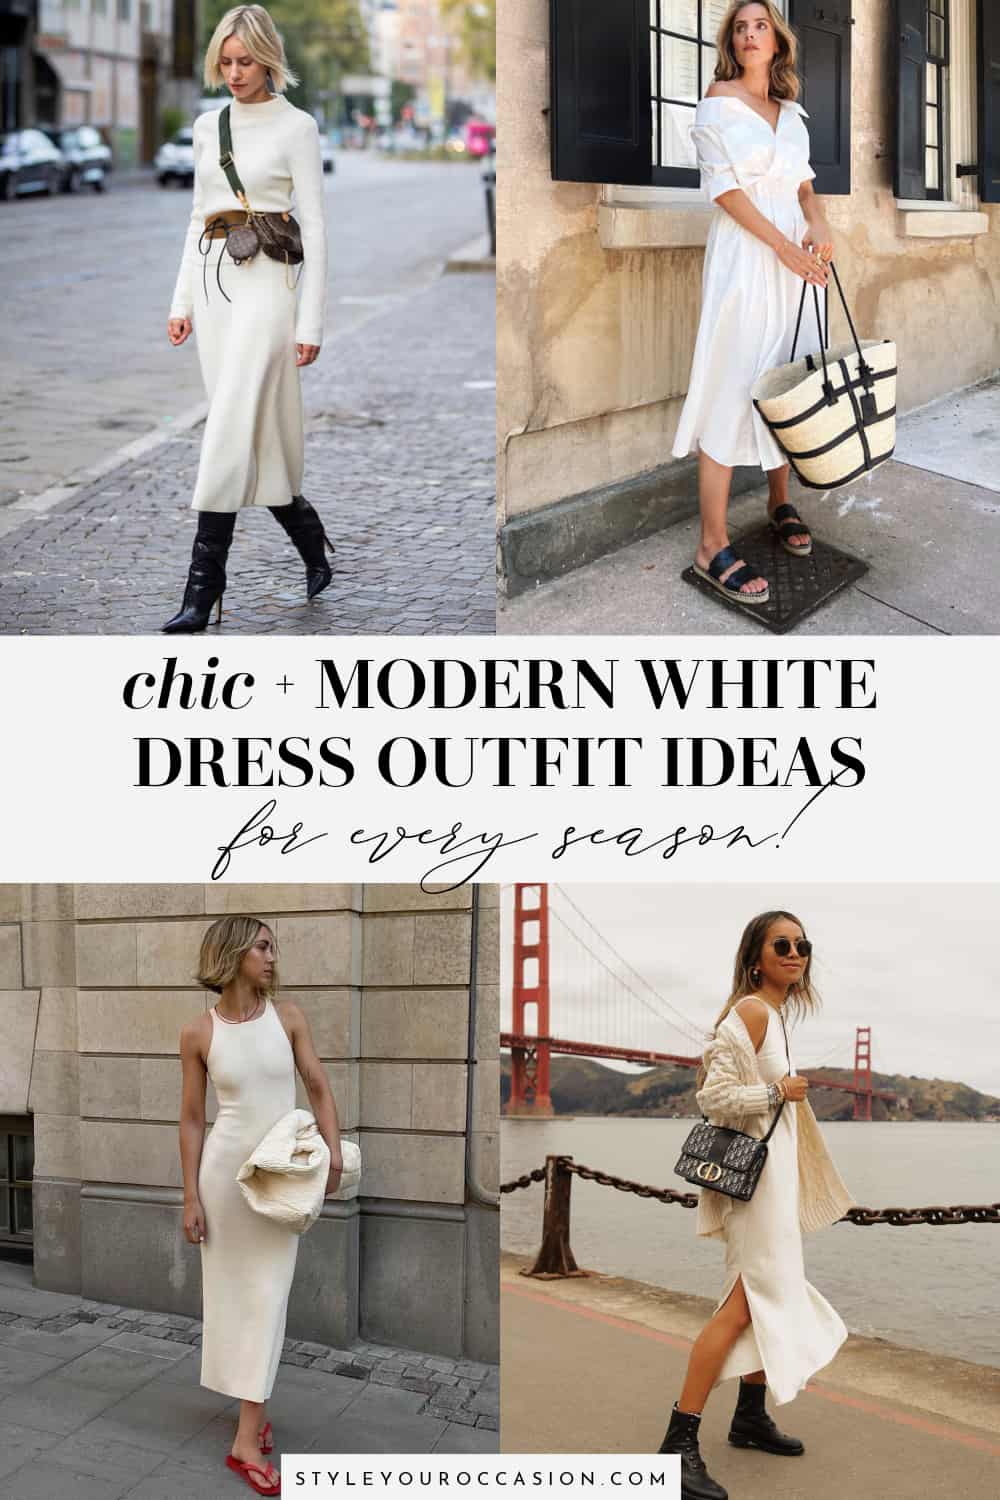 collage of images of women in outfits with white dresses